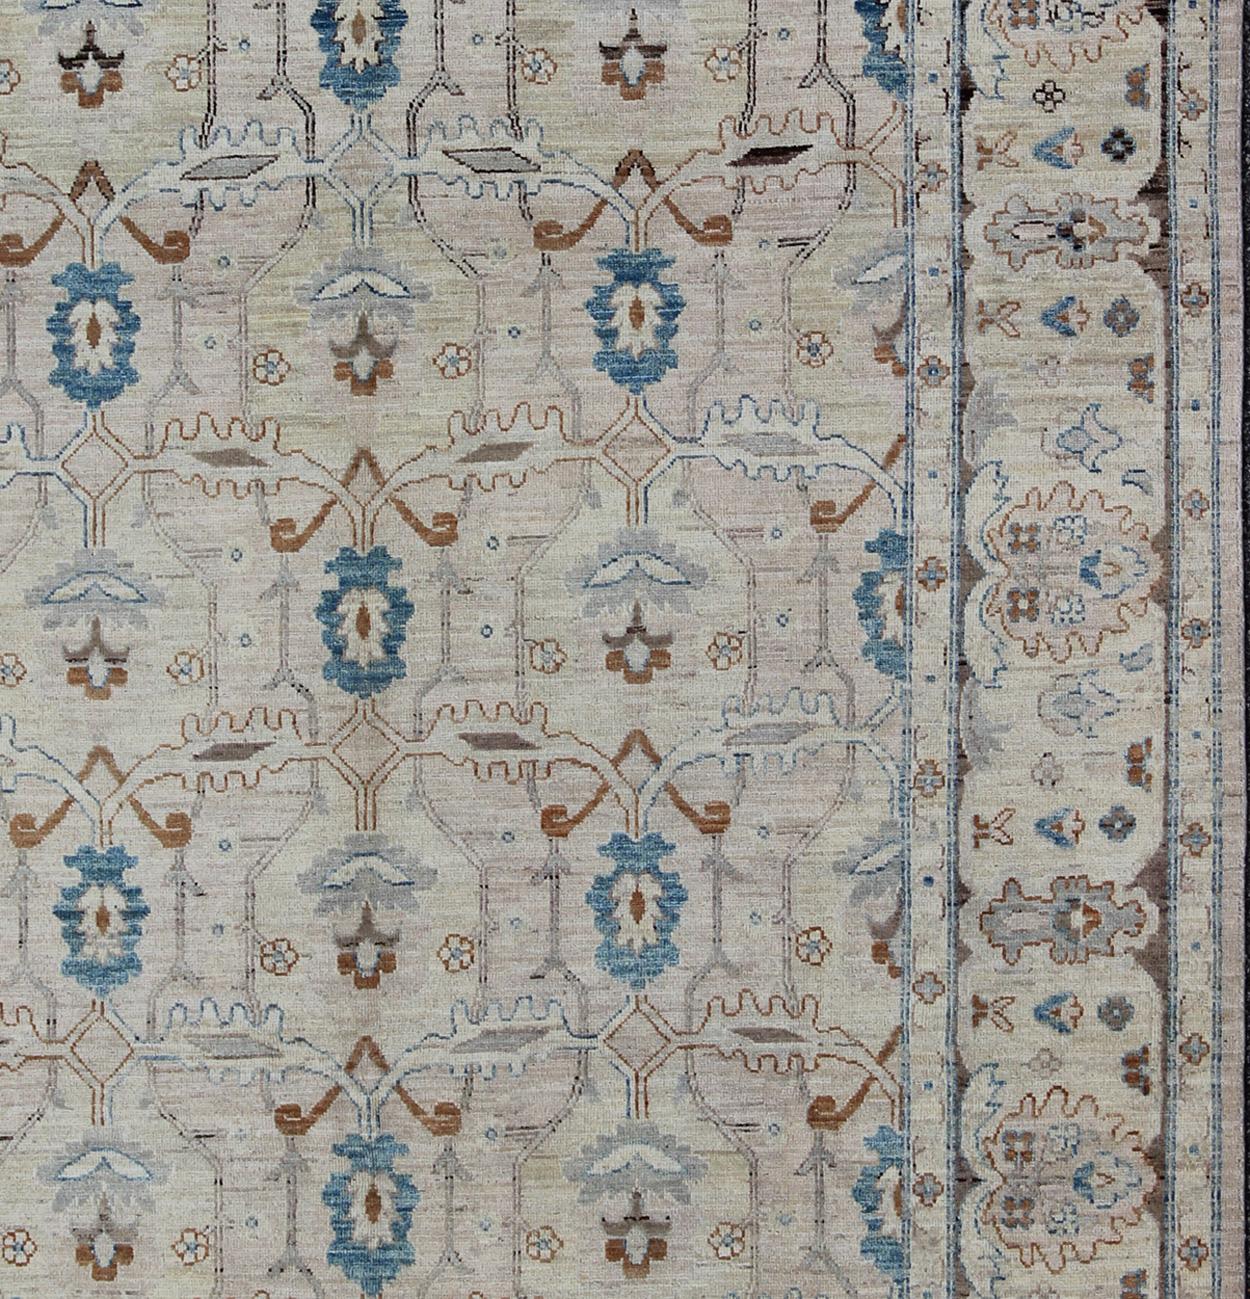 Light Color Khotan design rug with geometric motifs in Blush, Brown, Tan, and Blue, rug MP-1703-7565 country of origin / type: Afghanistan / Khotan

This Khotan features a geometric all-over design flanked by a repeating pattern in the border. The